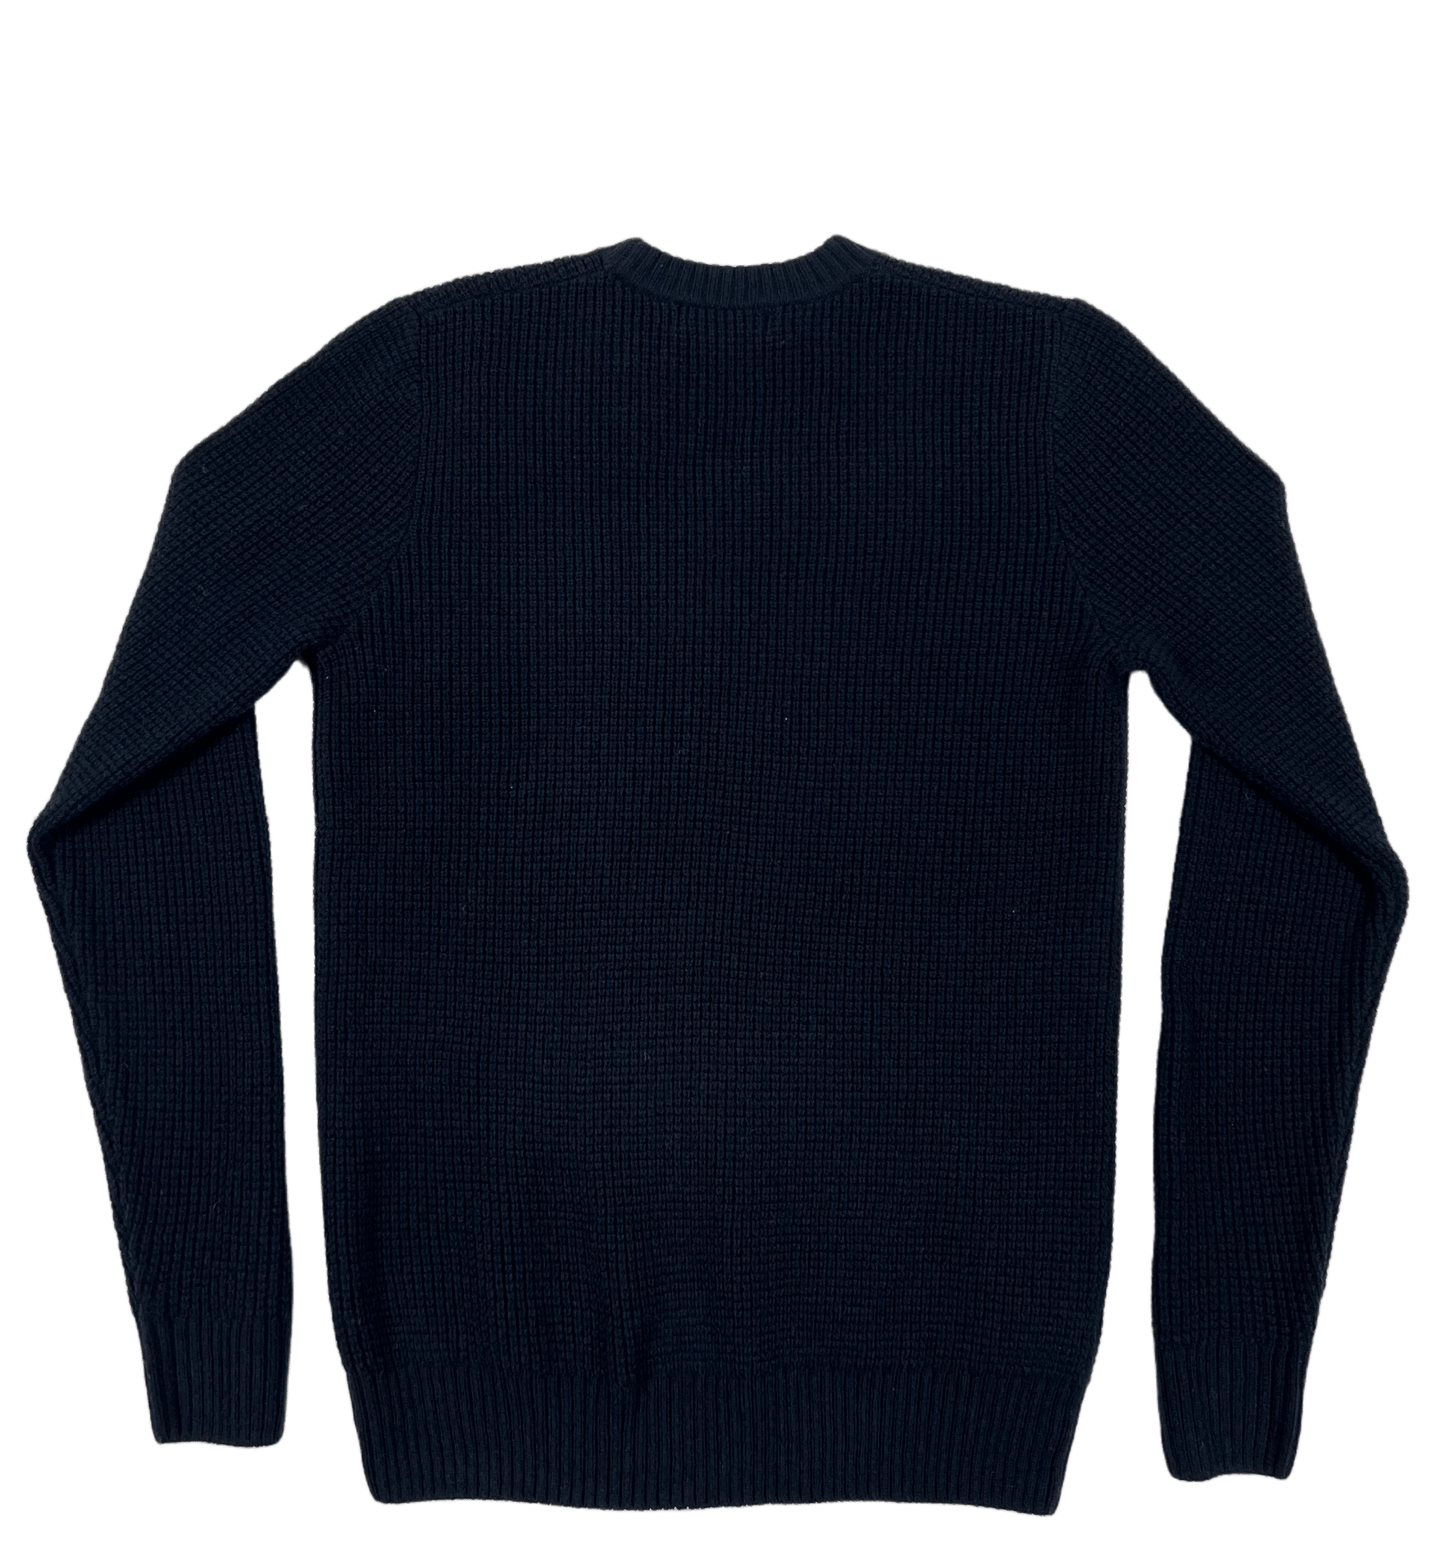 Probus FRED PERRY K4556 TEXTURE LAMBSWOOL JUMP NAVY S